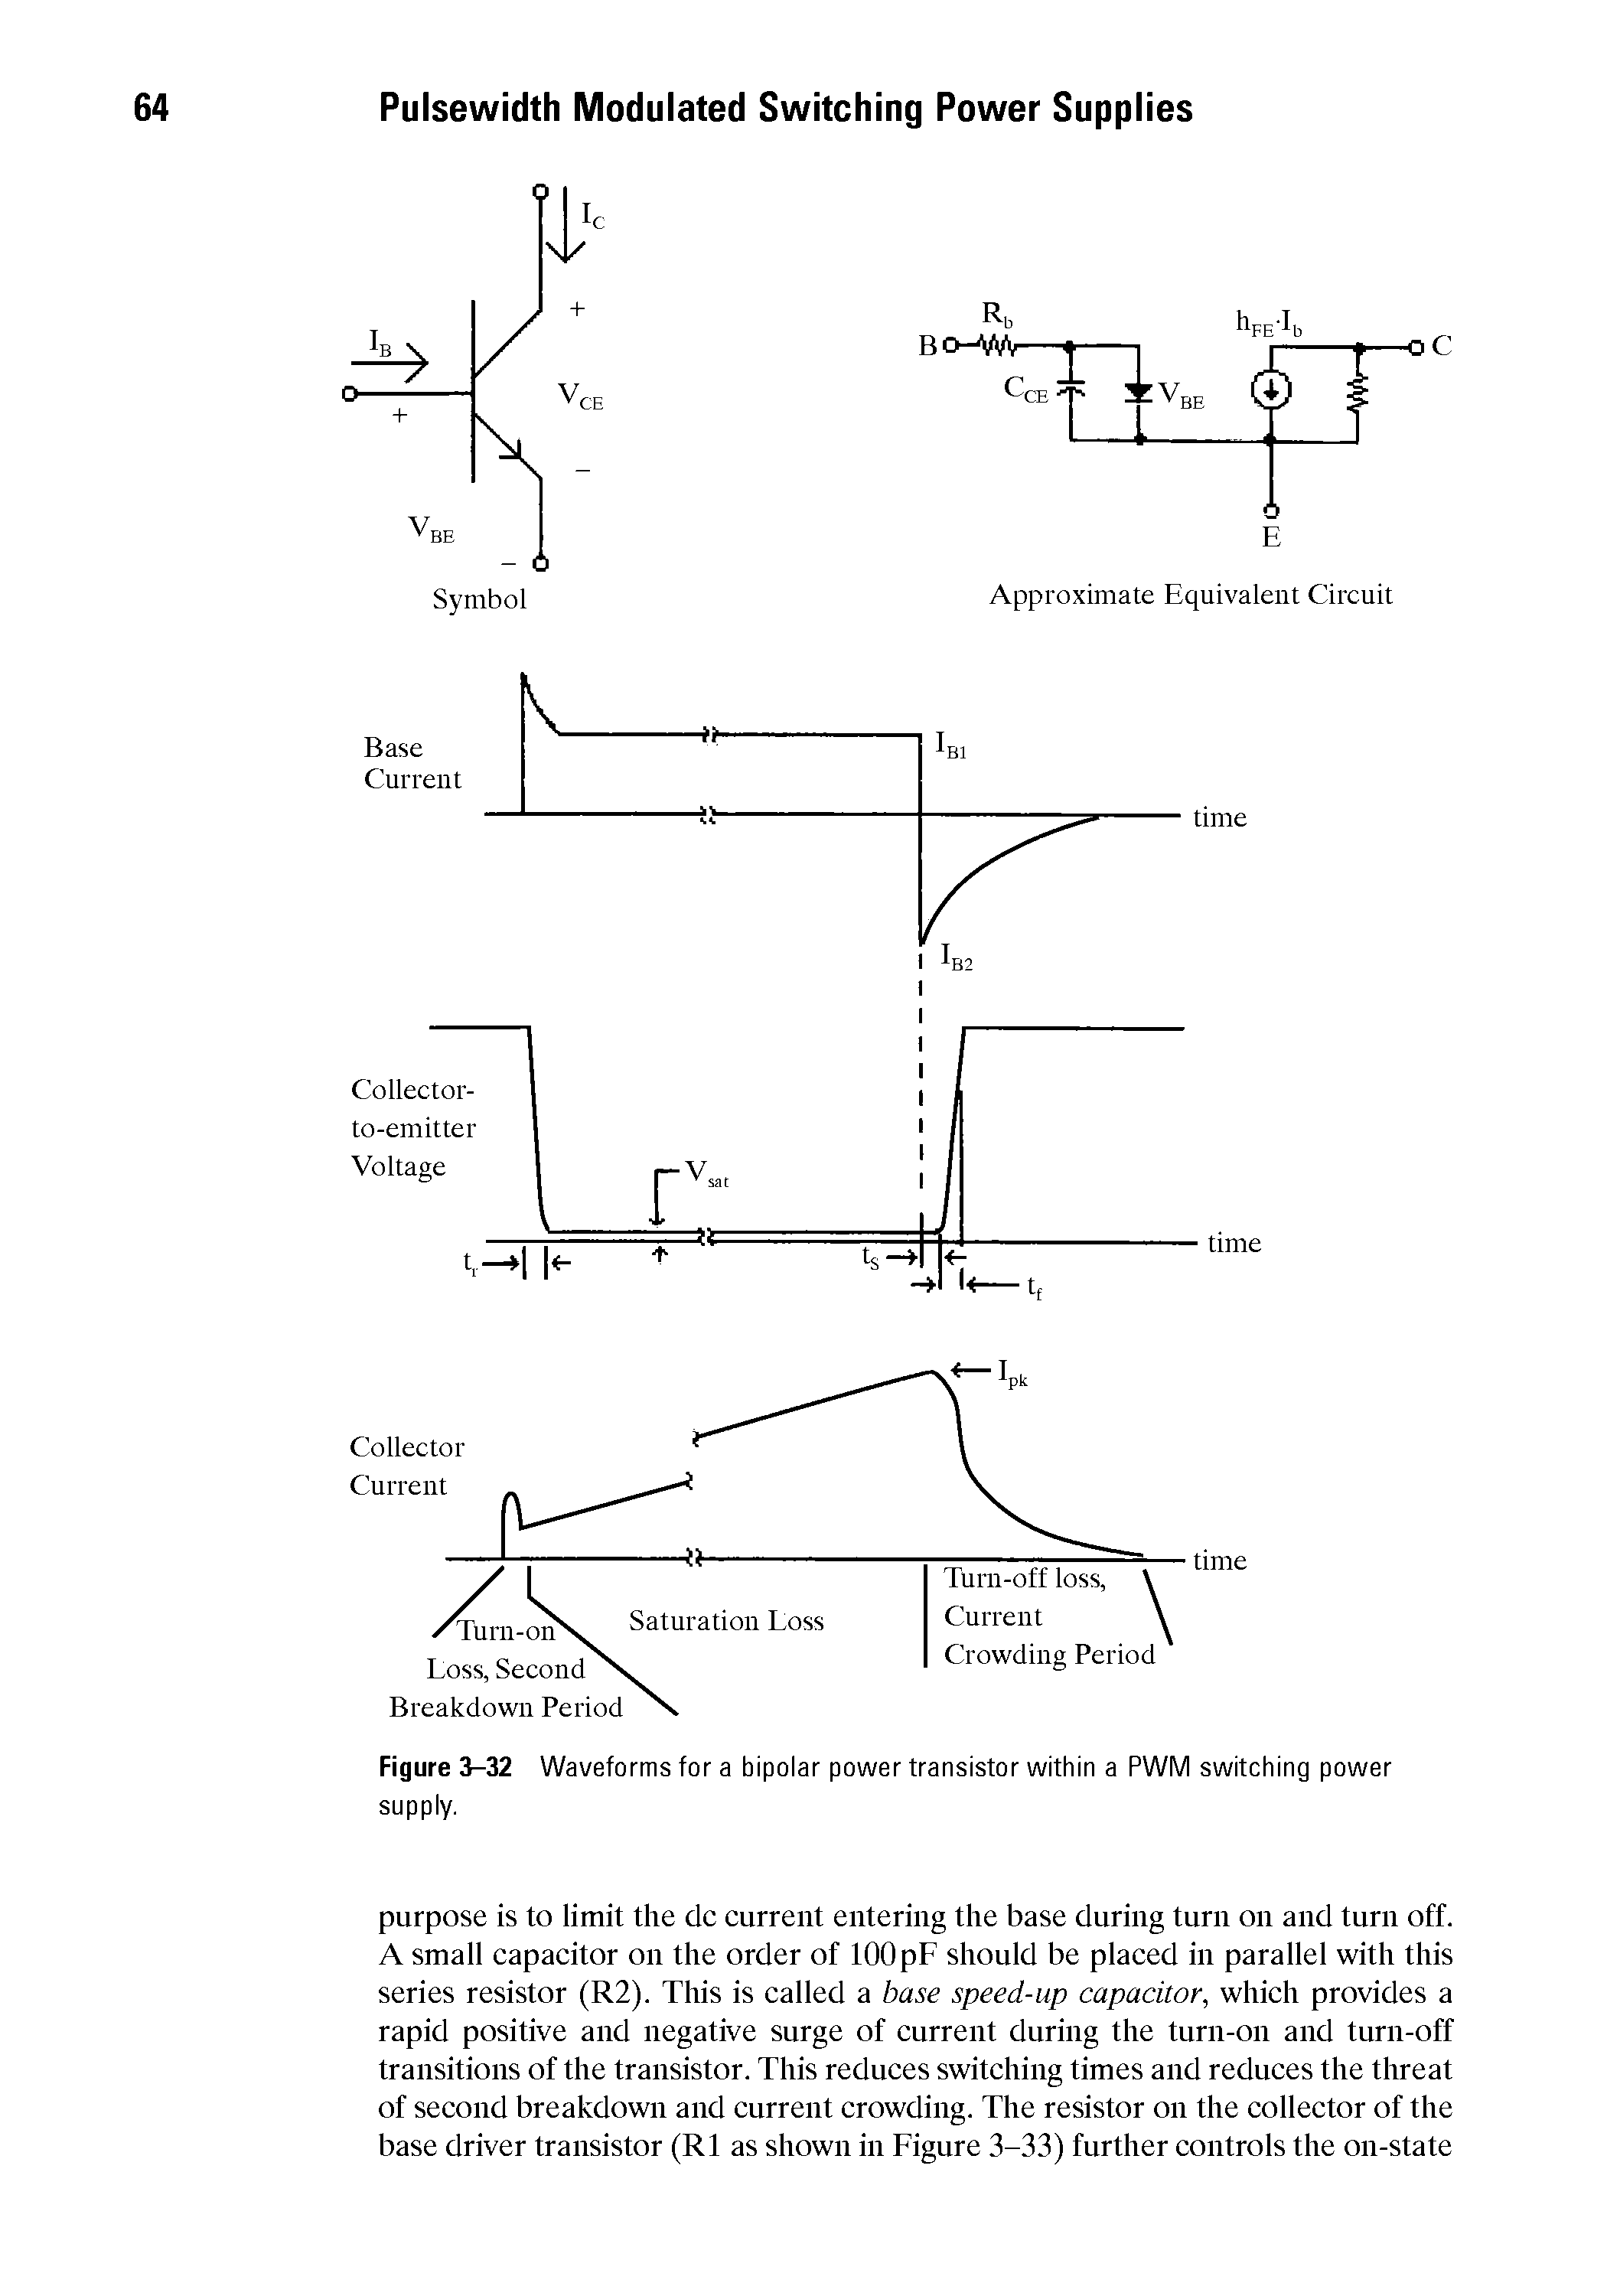 Figure 3-32 Waveforms for a bipolar power transistor within a PWM switching power supply.